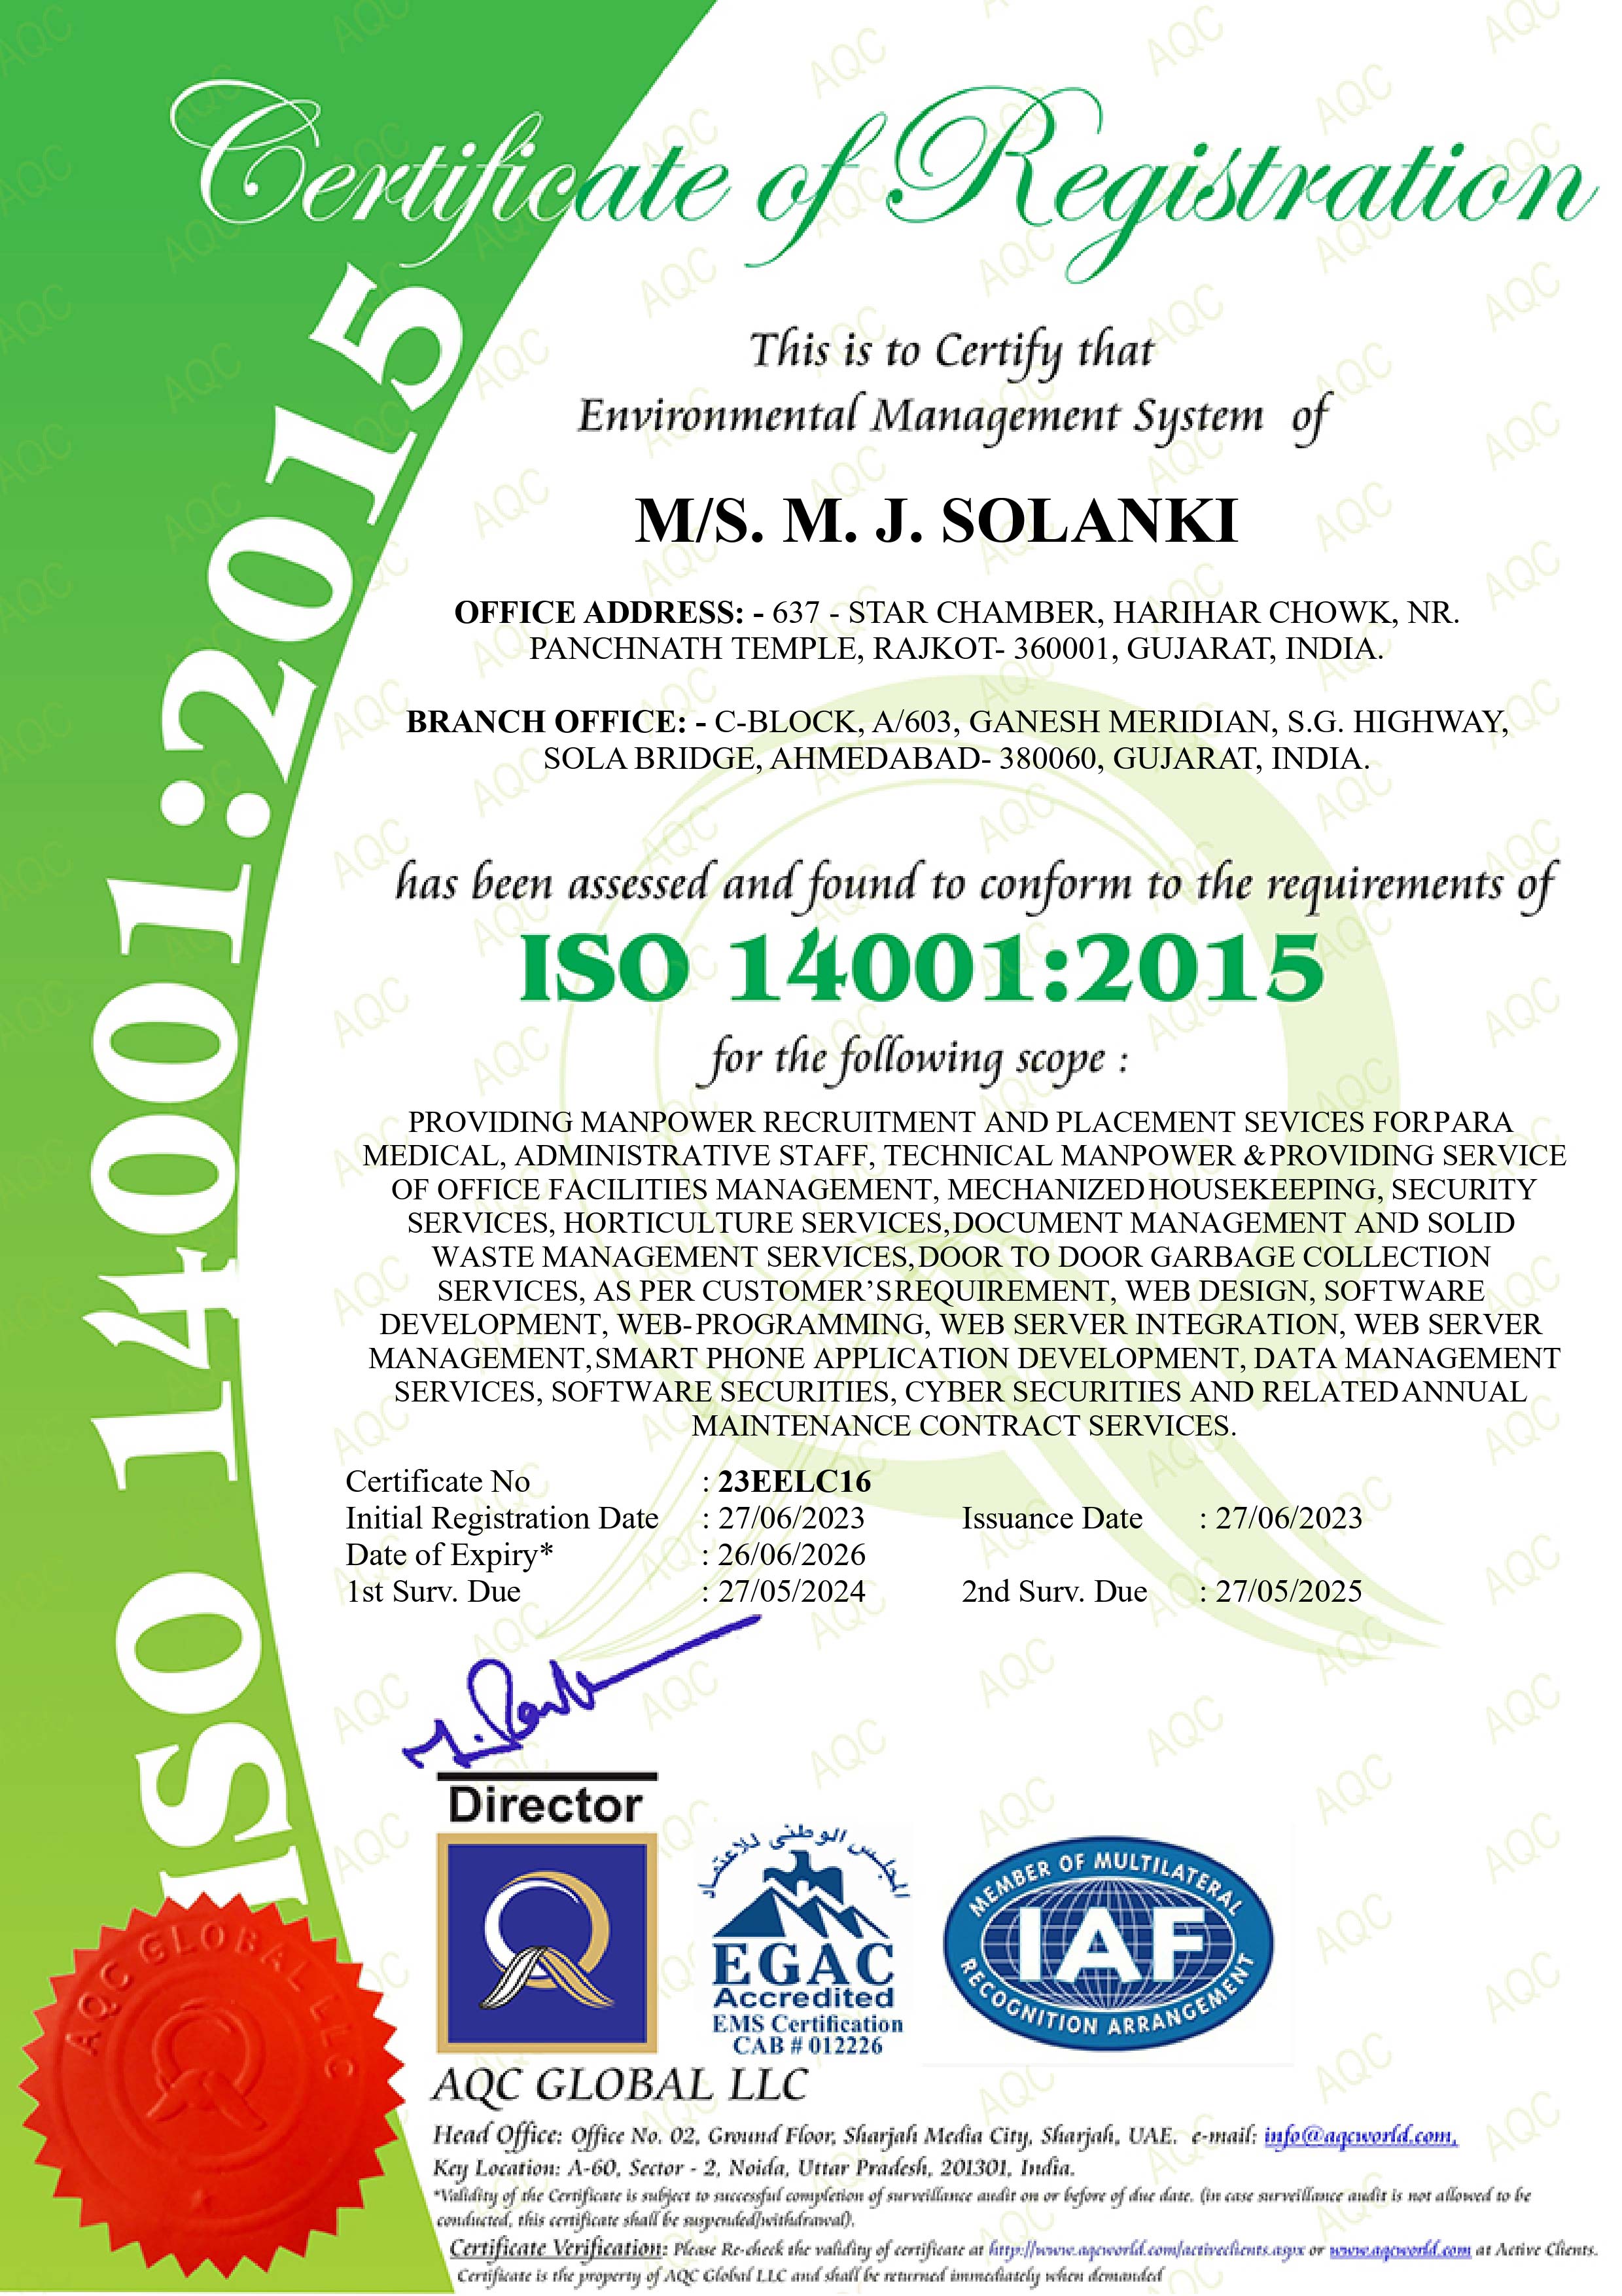 Environmental Management System Certificate Image